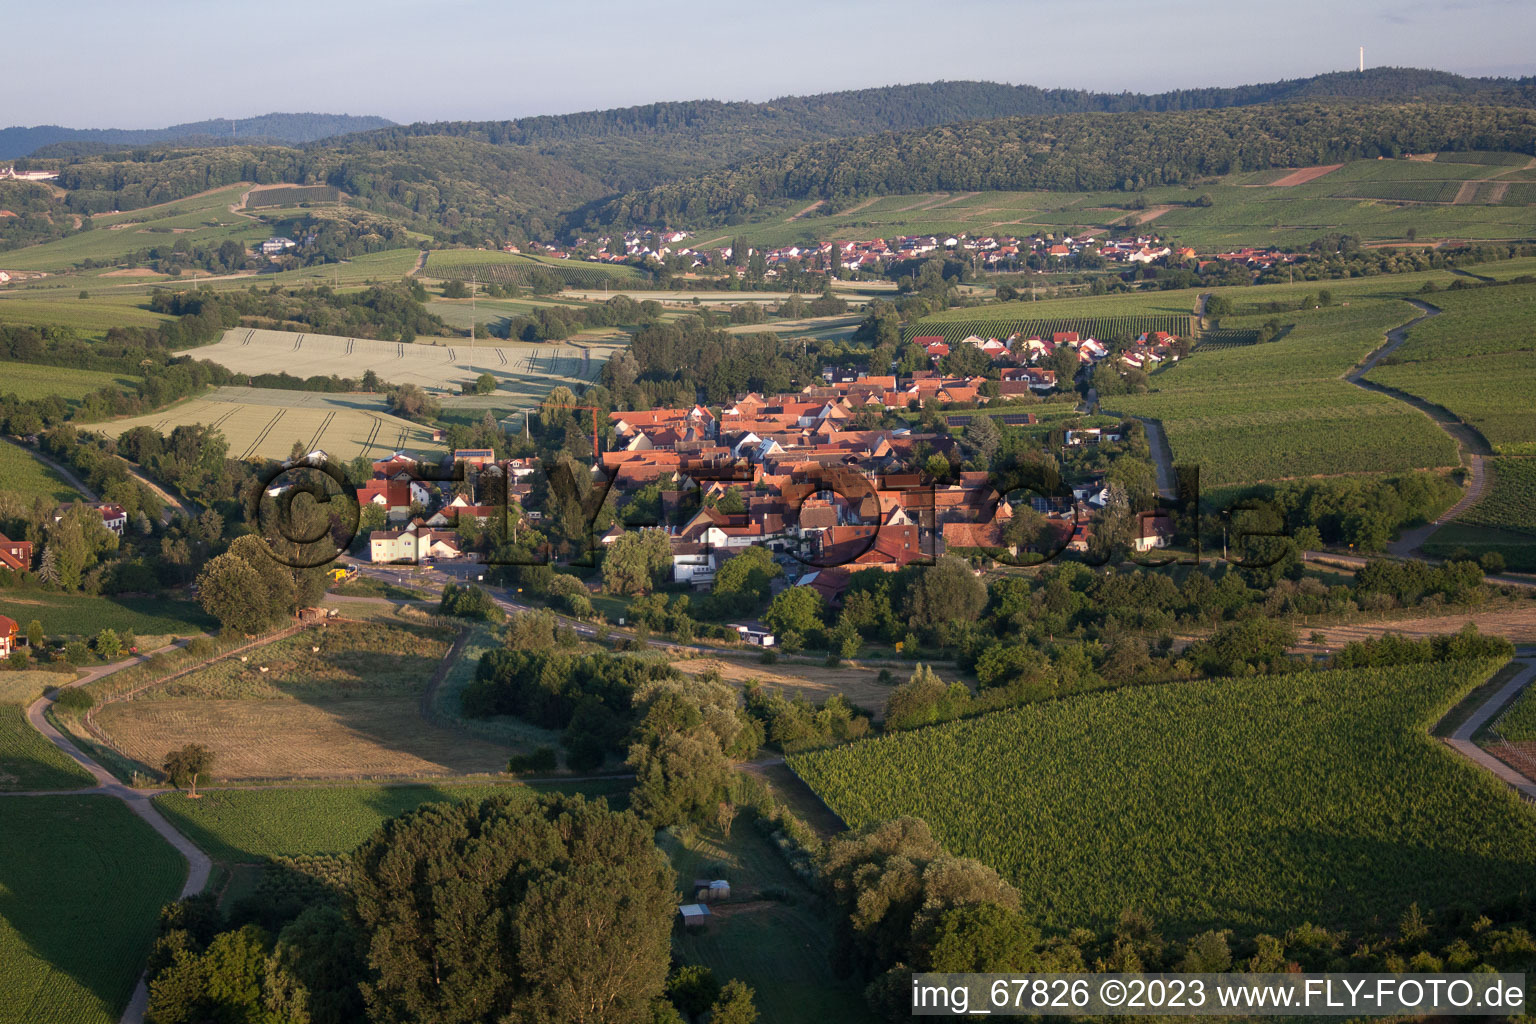 Drone recording of Niederhorbach in the state Rhineland-Palatinate, Germany